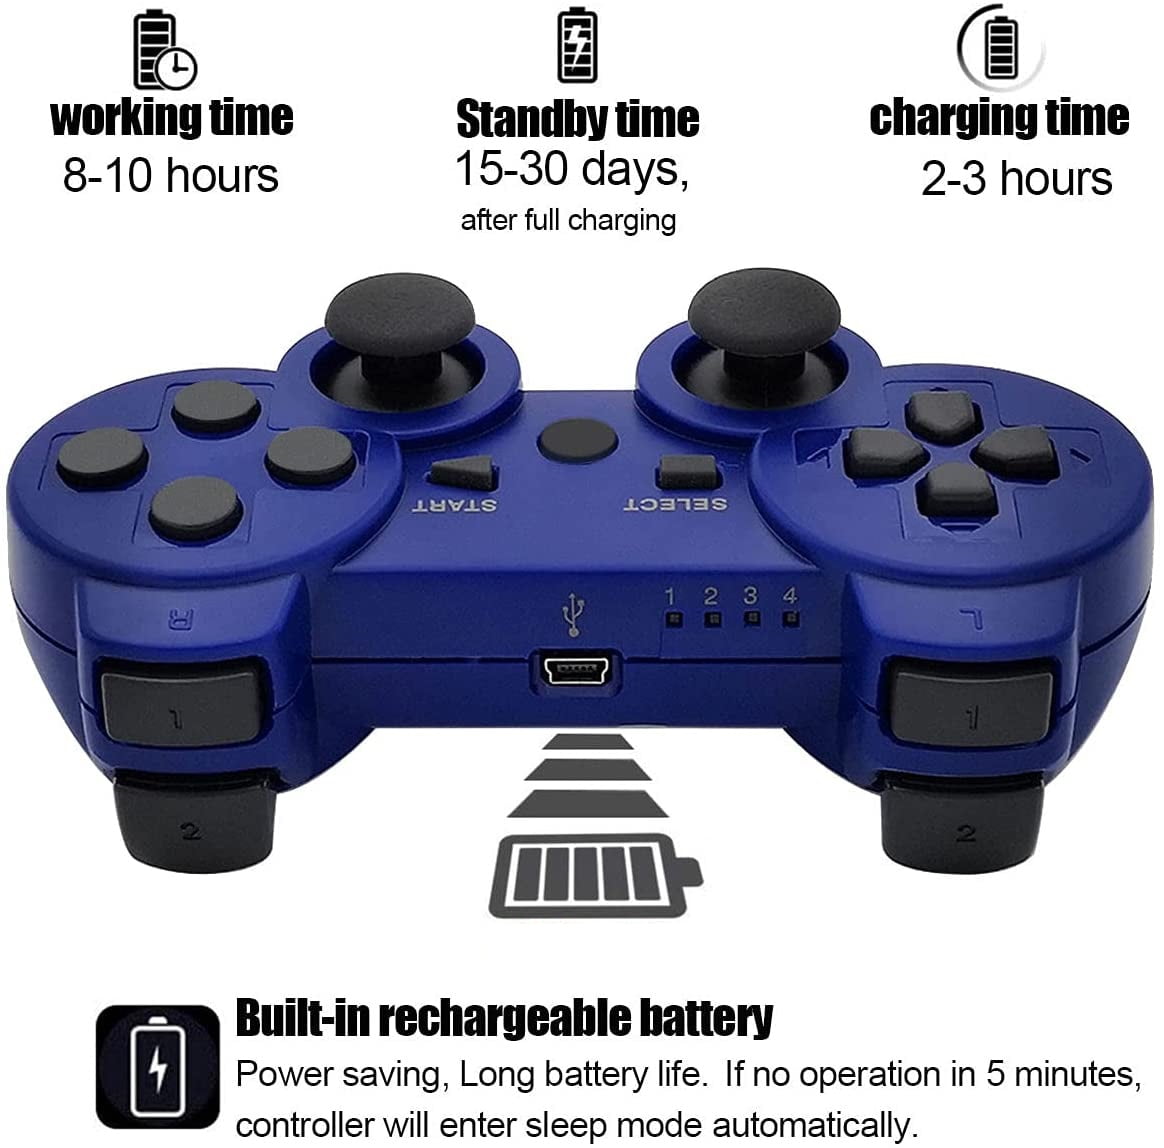 USB Gaming controller for PlayStation 3, Blue 98592104M - The Home Depot